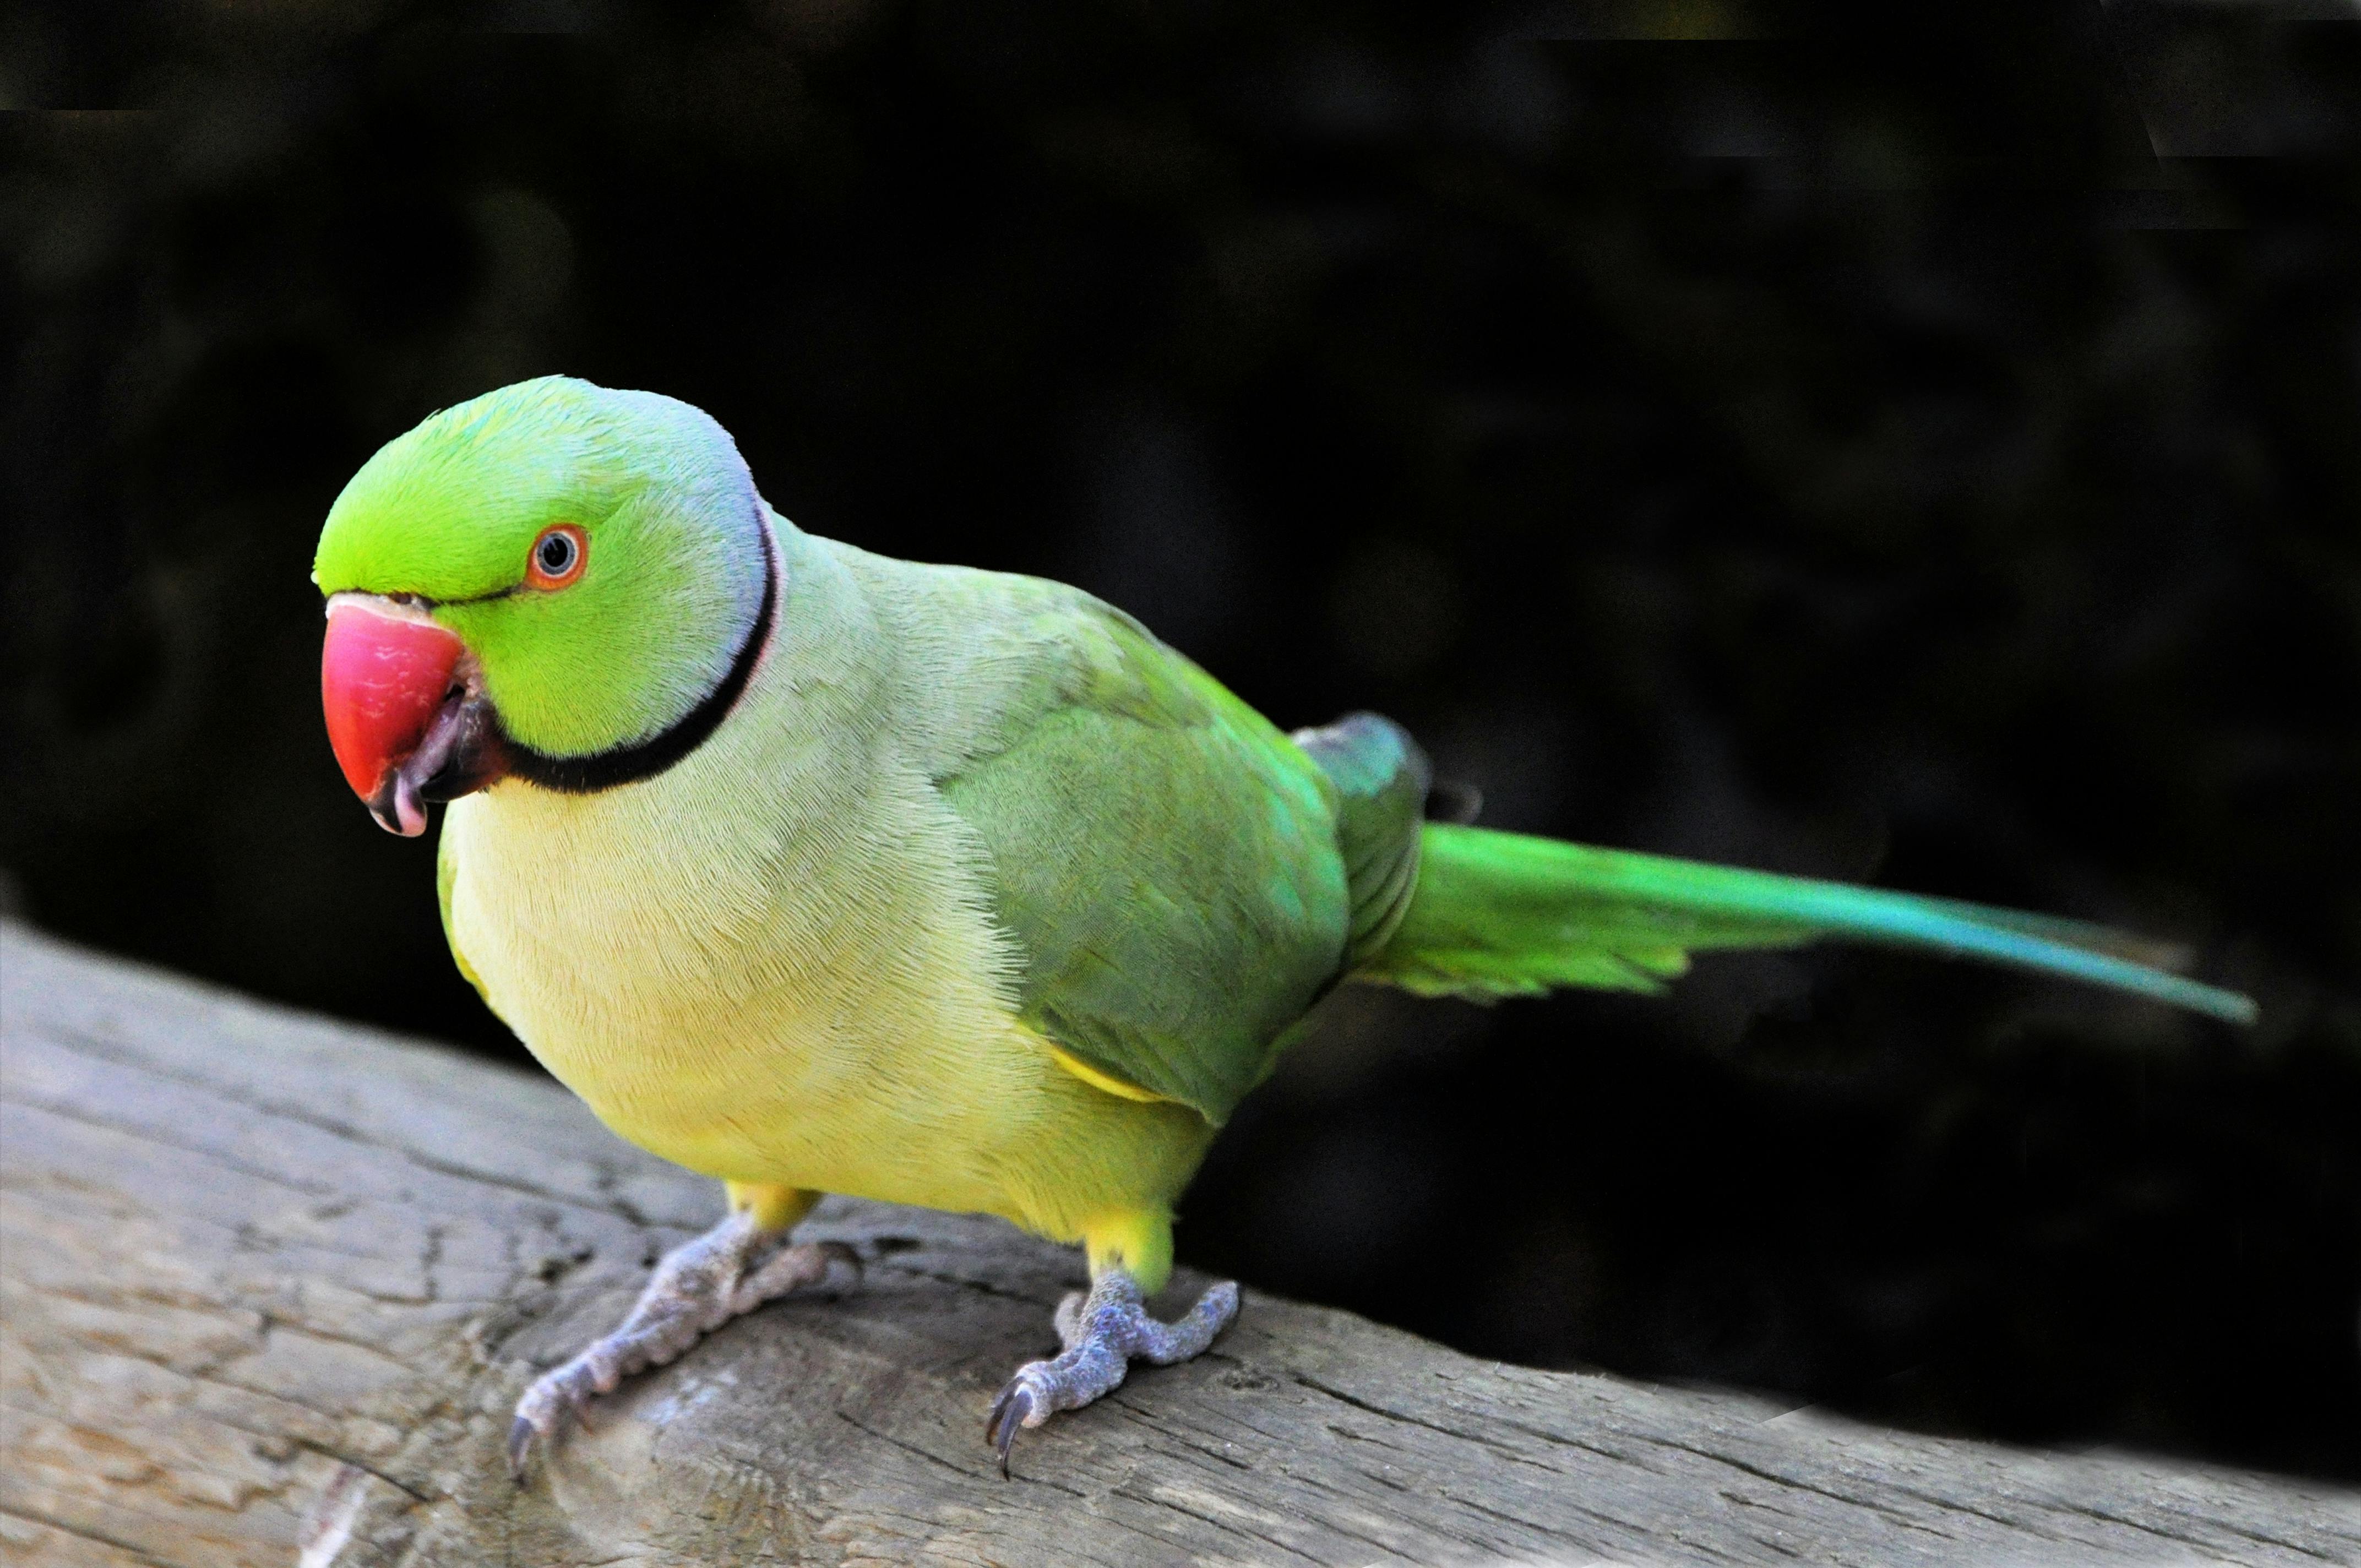 288+ Thousand Colorful Parrot Royalty-Free Images, Stock Photos & Pictures